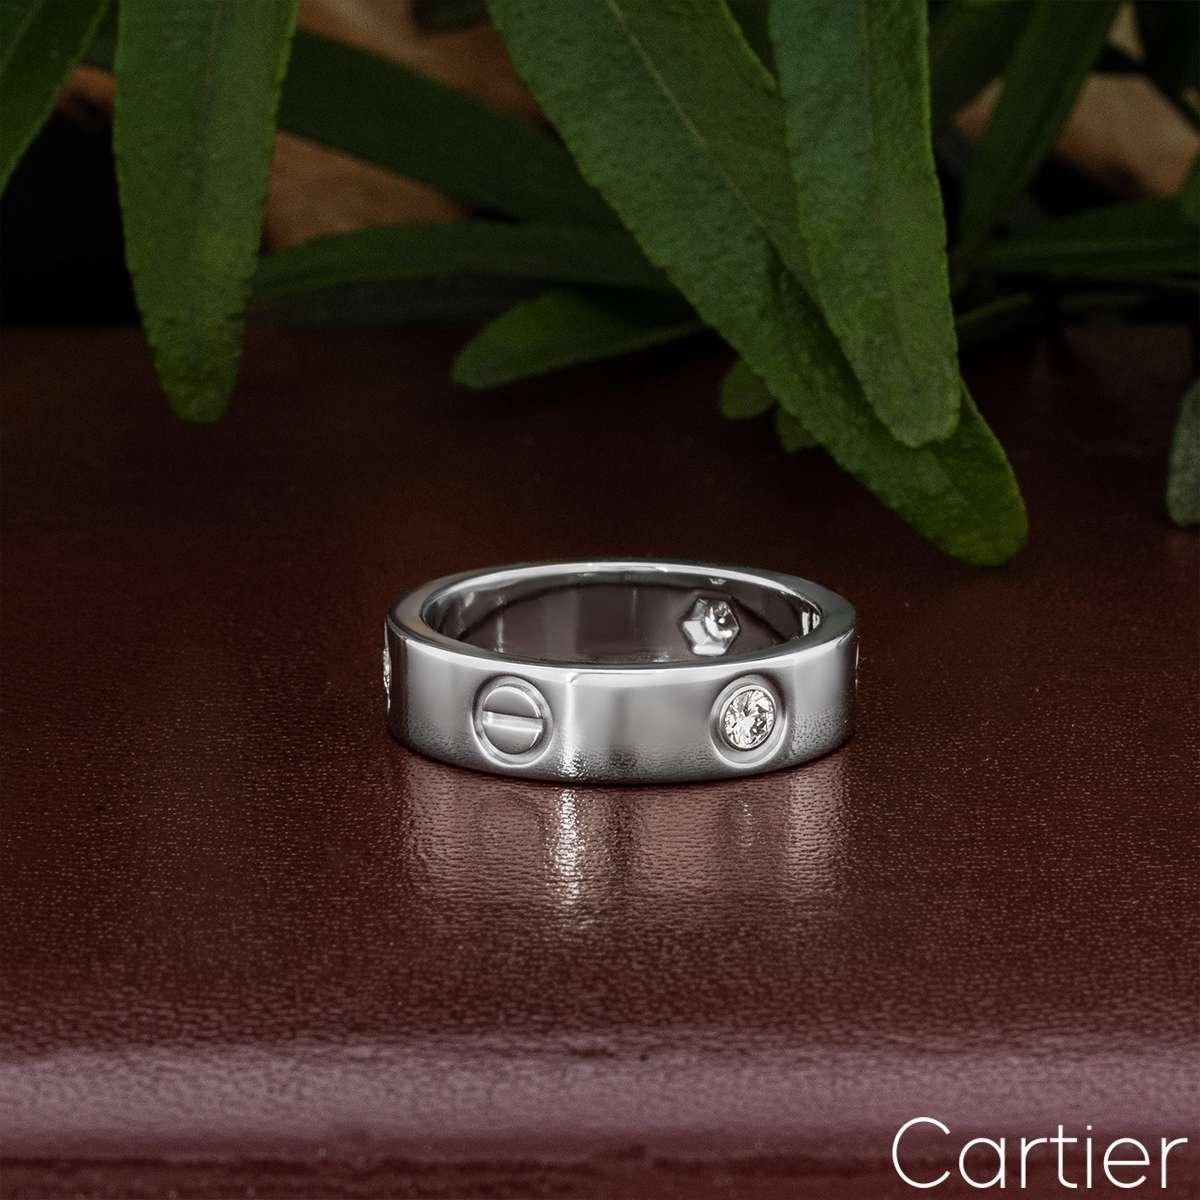 Cartier White Gold Half Diamond Love Ring Size 52 B4032500 For Sale 2